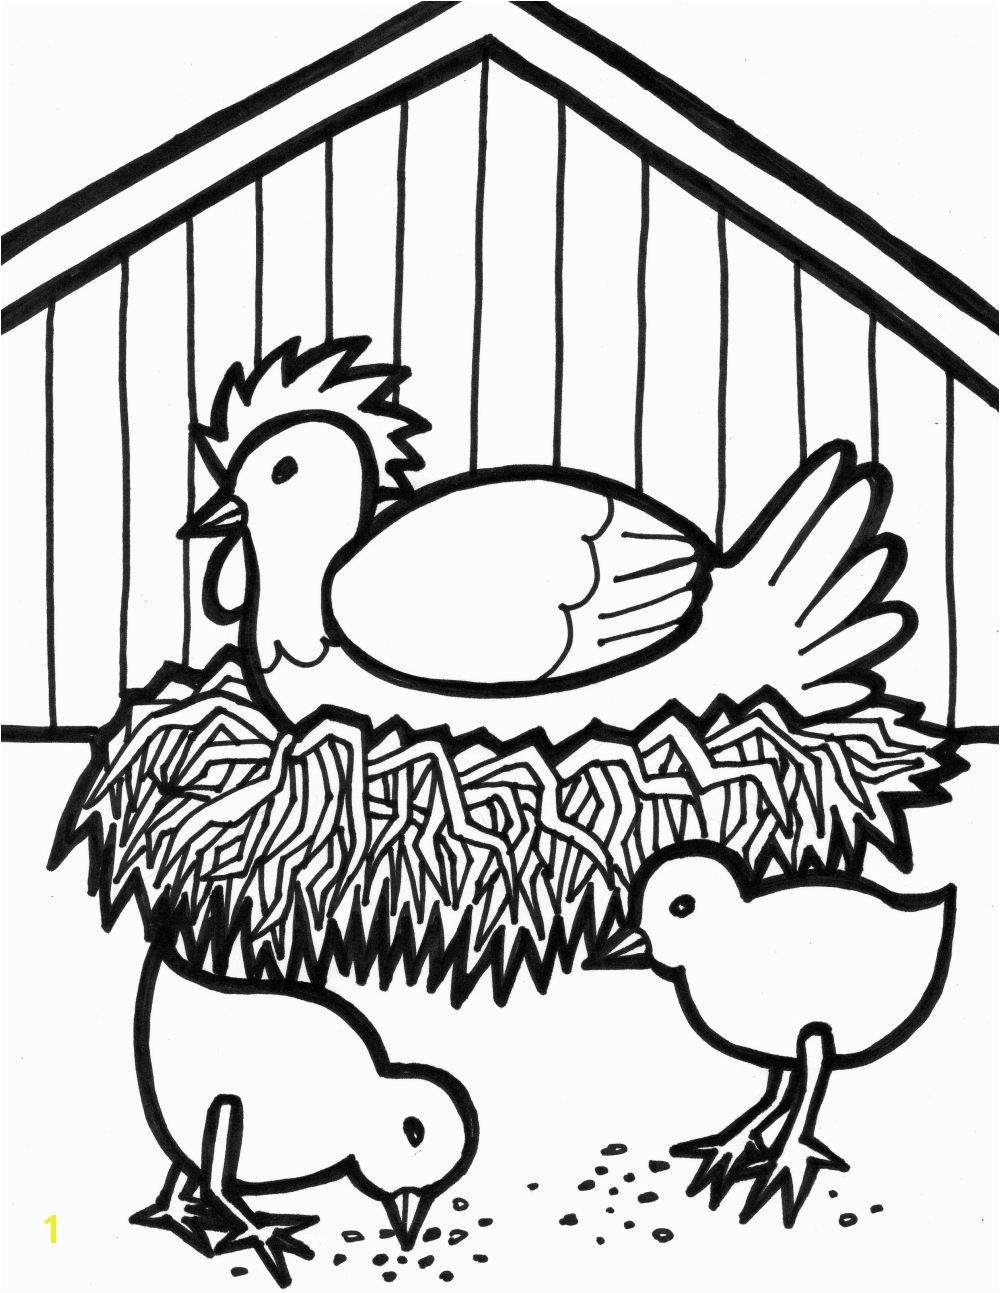 Free Printable Animal Coloring Pages Free Printable Farm Animal Coloring Pages for Kids